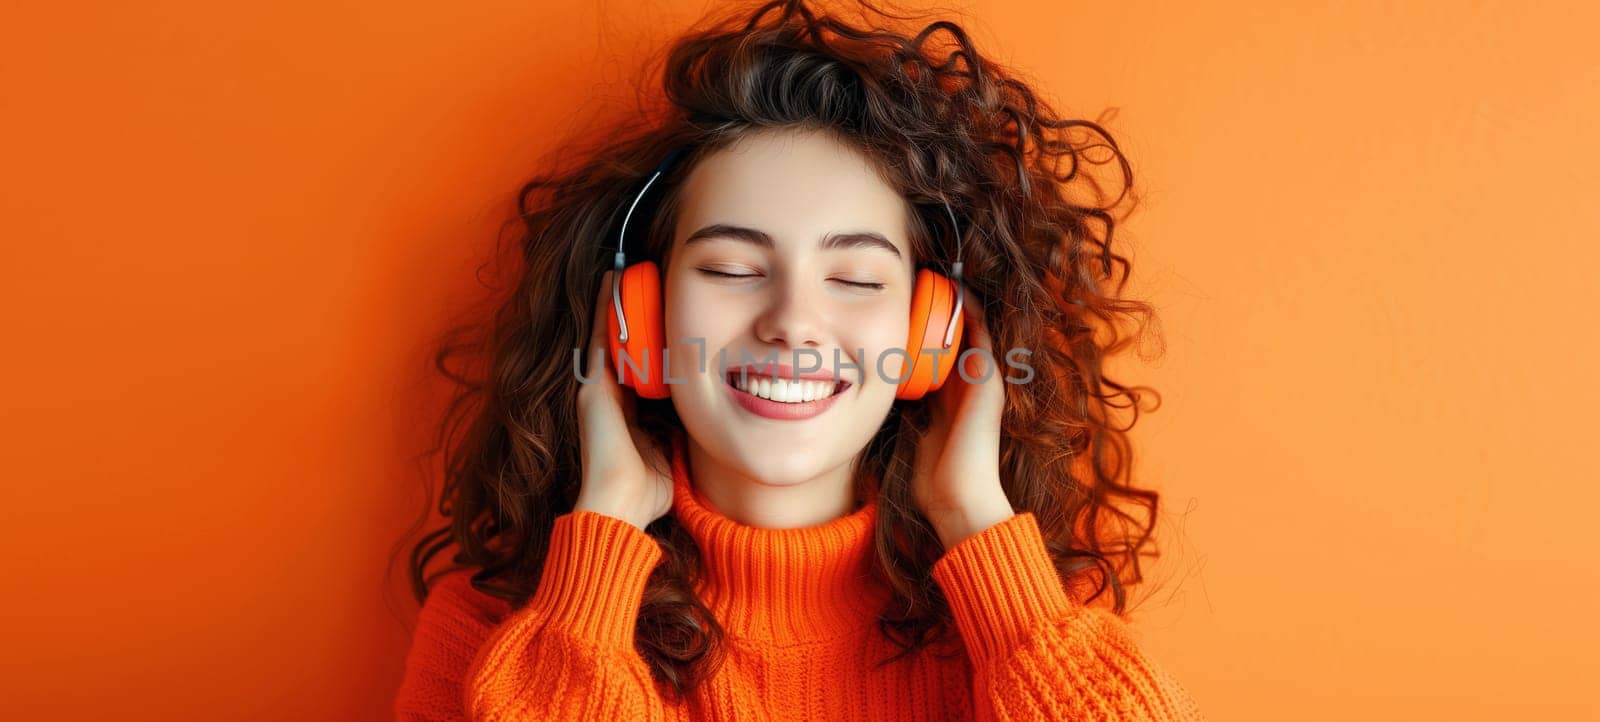 Portrait of happy modern young woman listening to music with headphones on vivid orange background